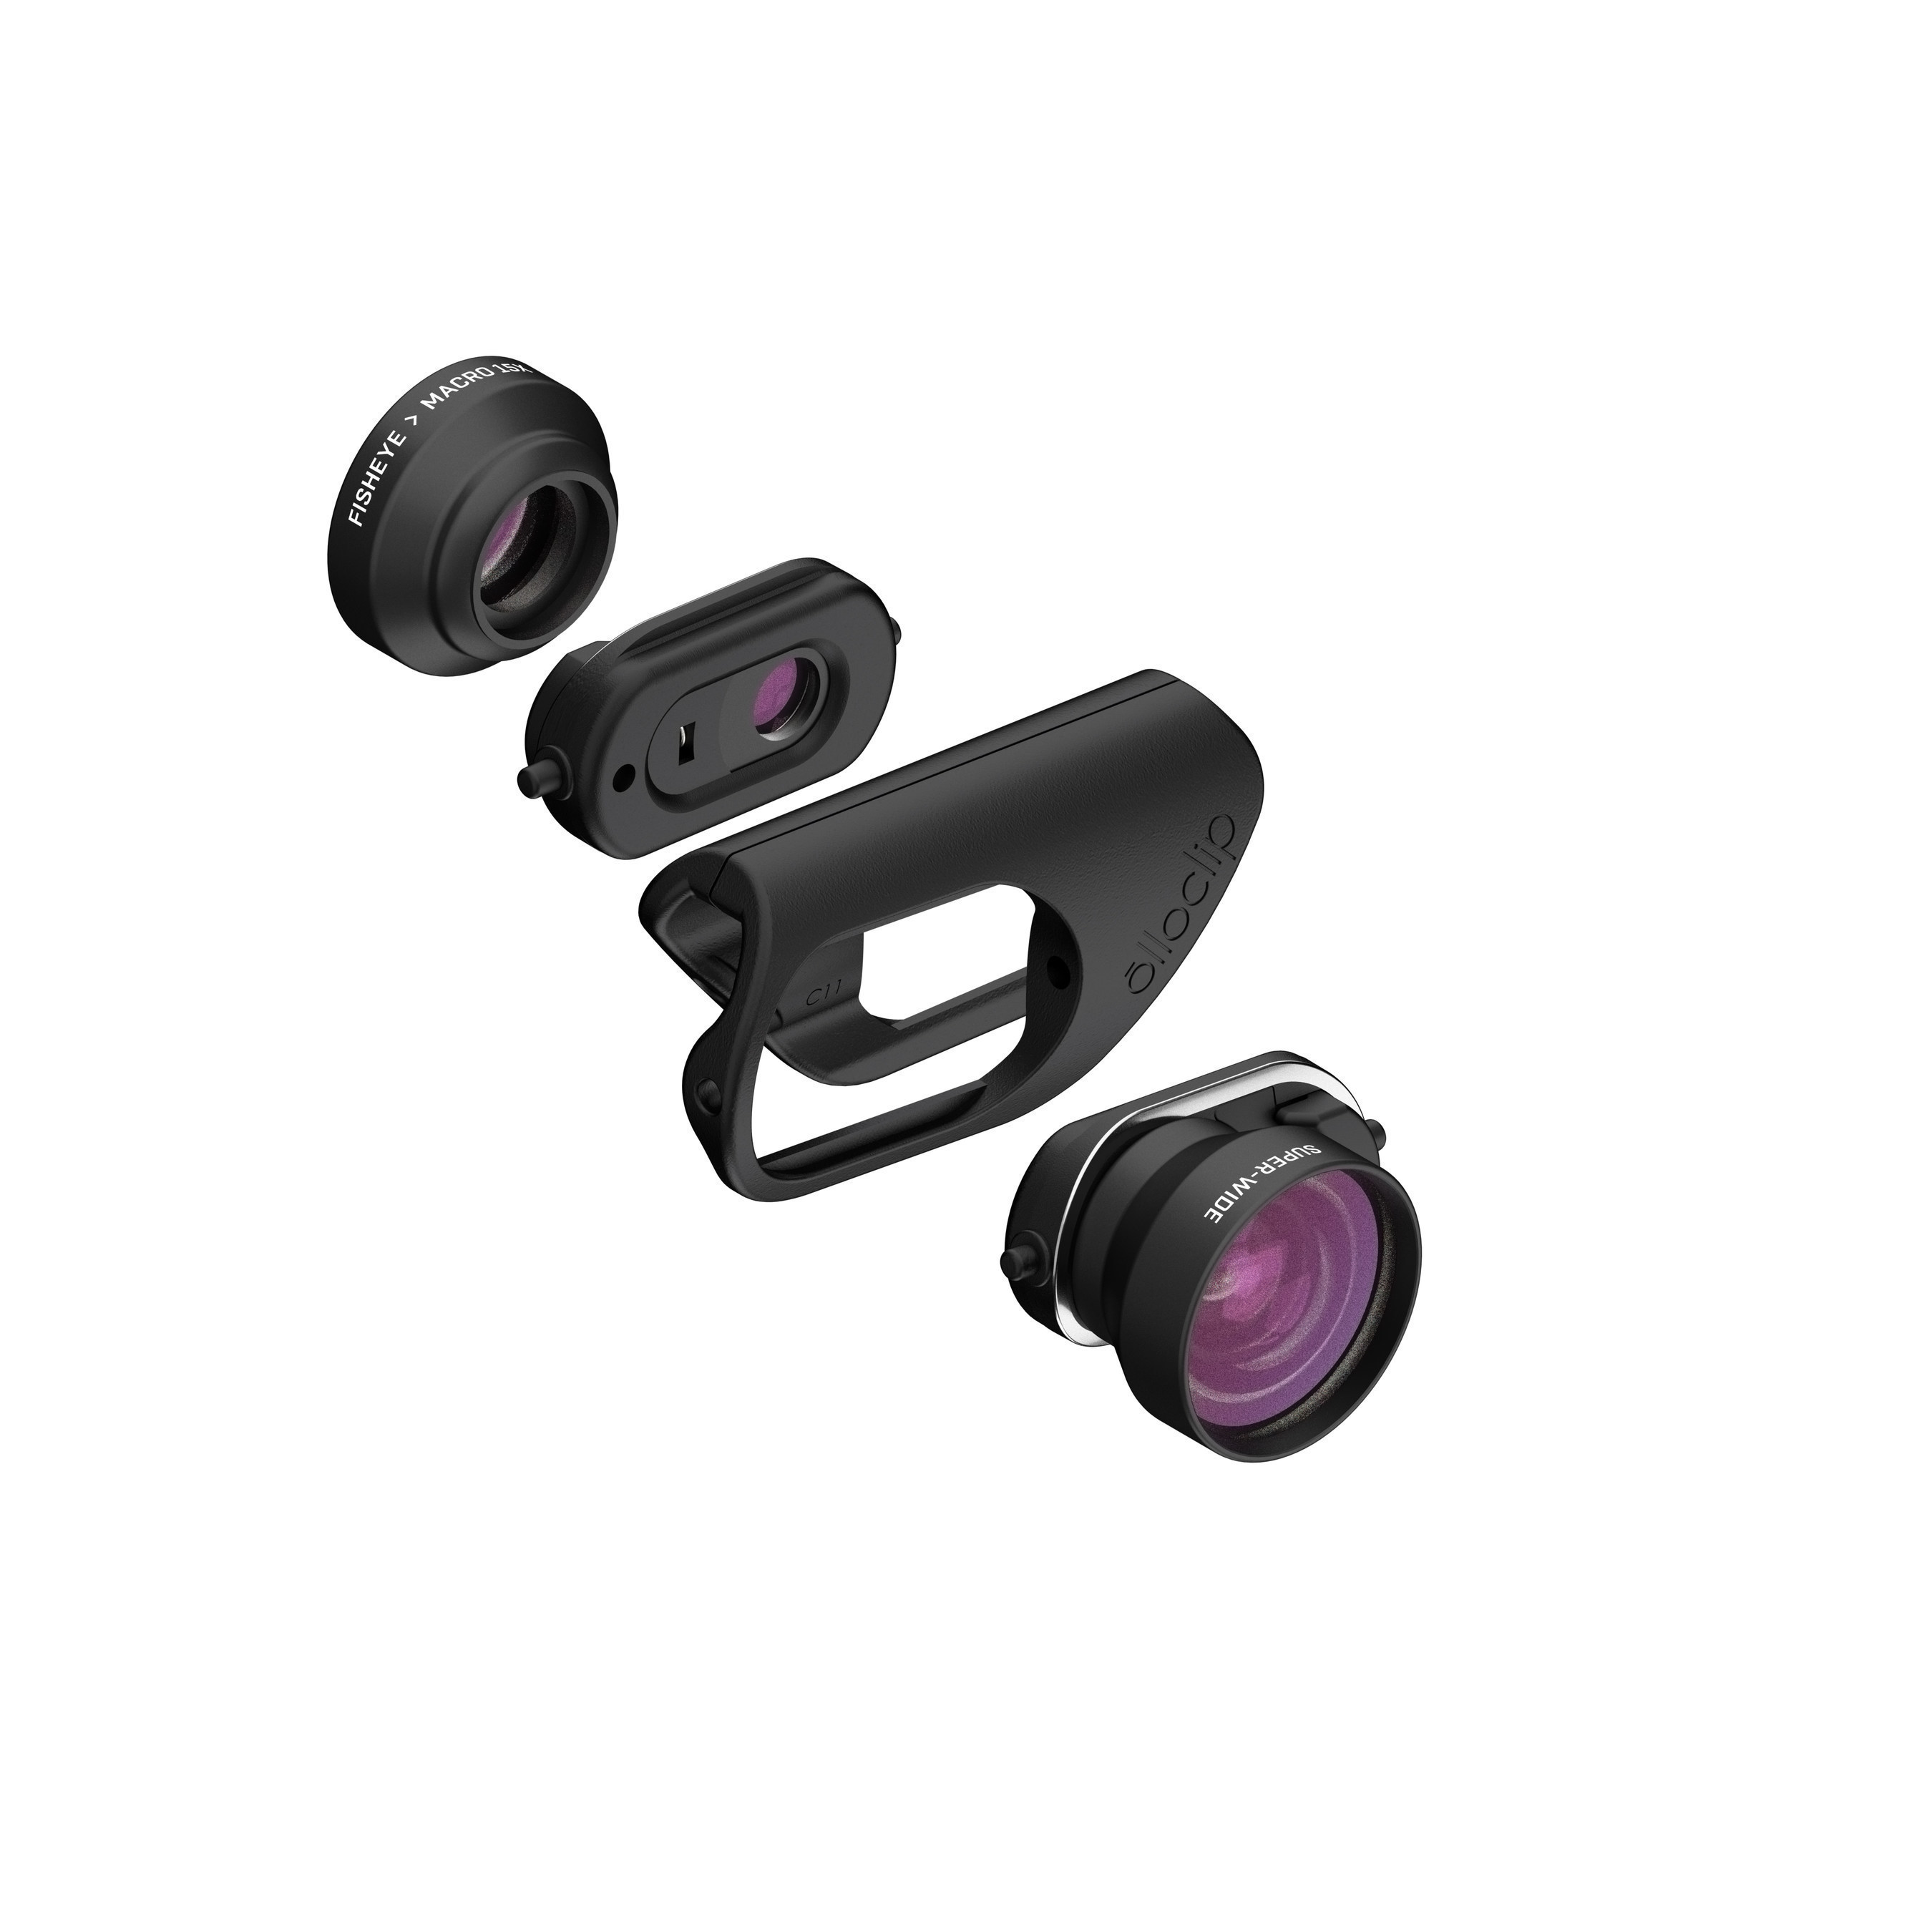 olloclip's newly designed mobile photography lens sets for iPhone 7 and 7 Plus feature new premium multi-element optics, the new Connect(TM) interchangeable lens system and an innovative hinged lens base keeping the lens flush with the camera for improved optical performance while allowing compatibility with most screen protectors. This new design delivers premium optics in the simplest, quickest and most versatile mobile lens system ever created.